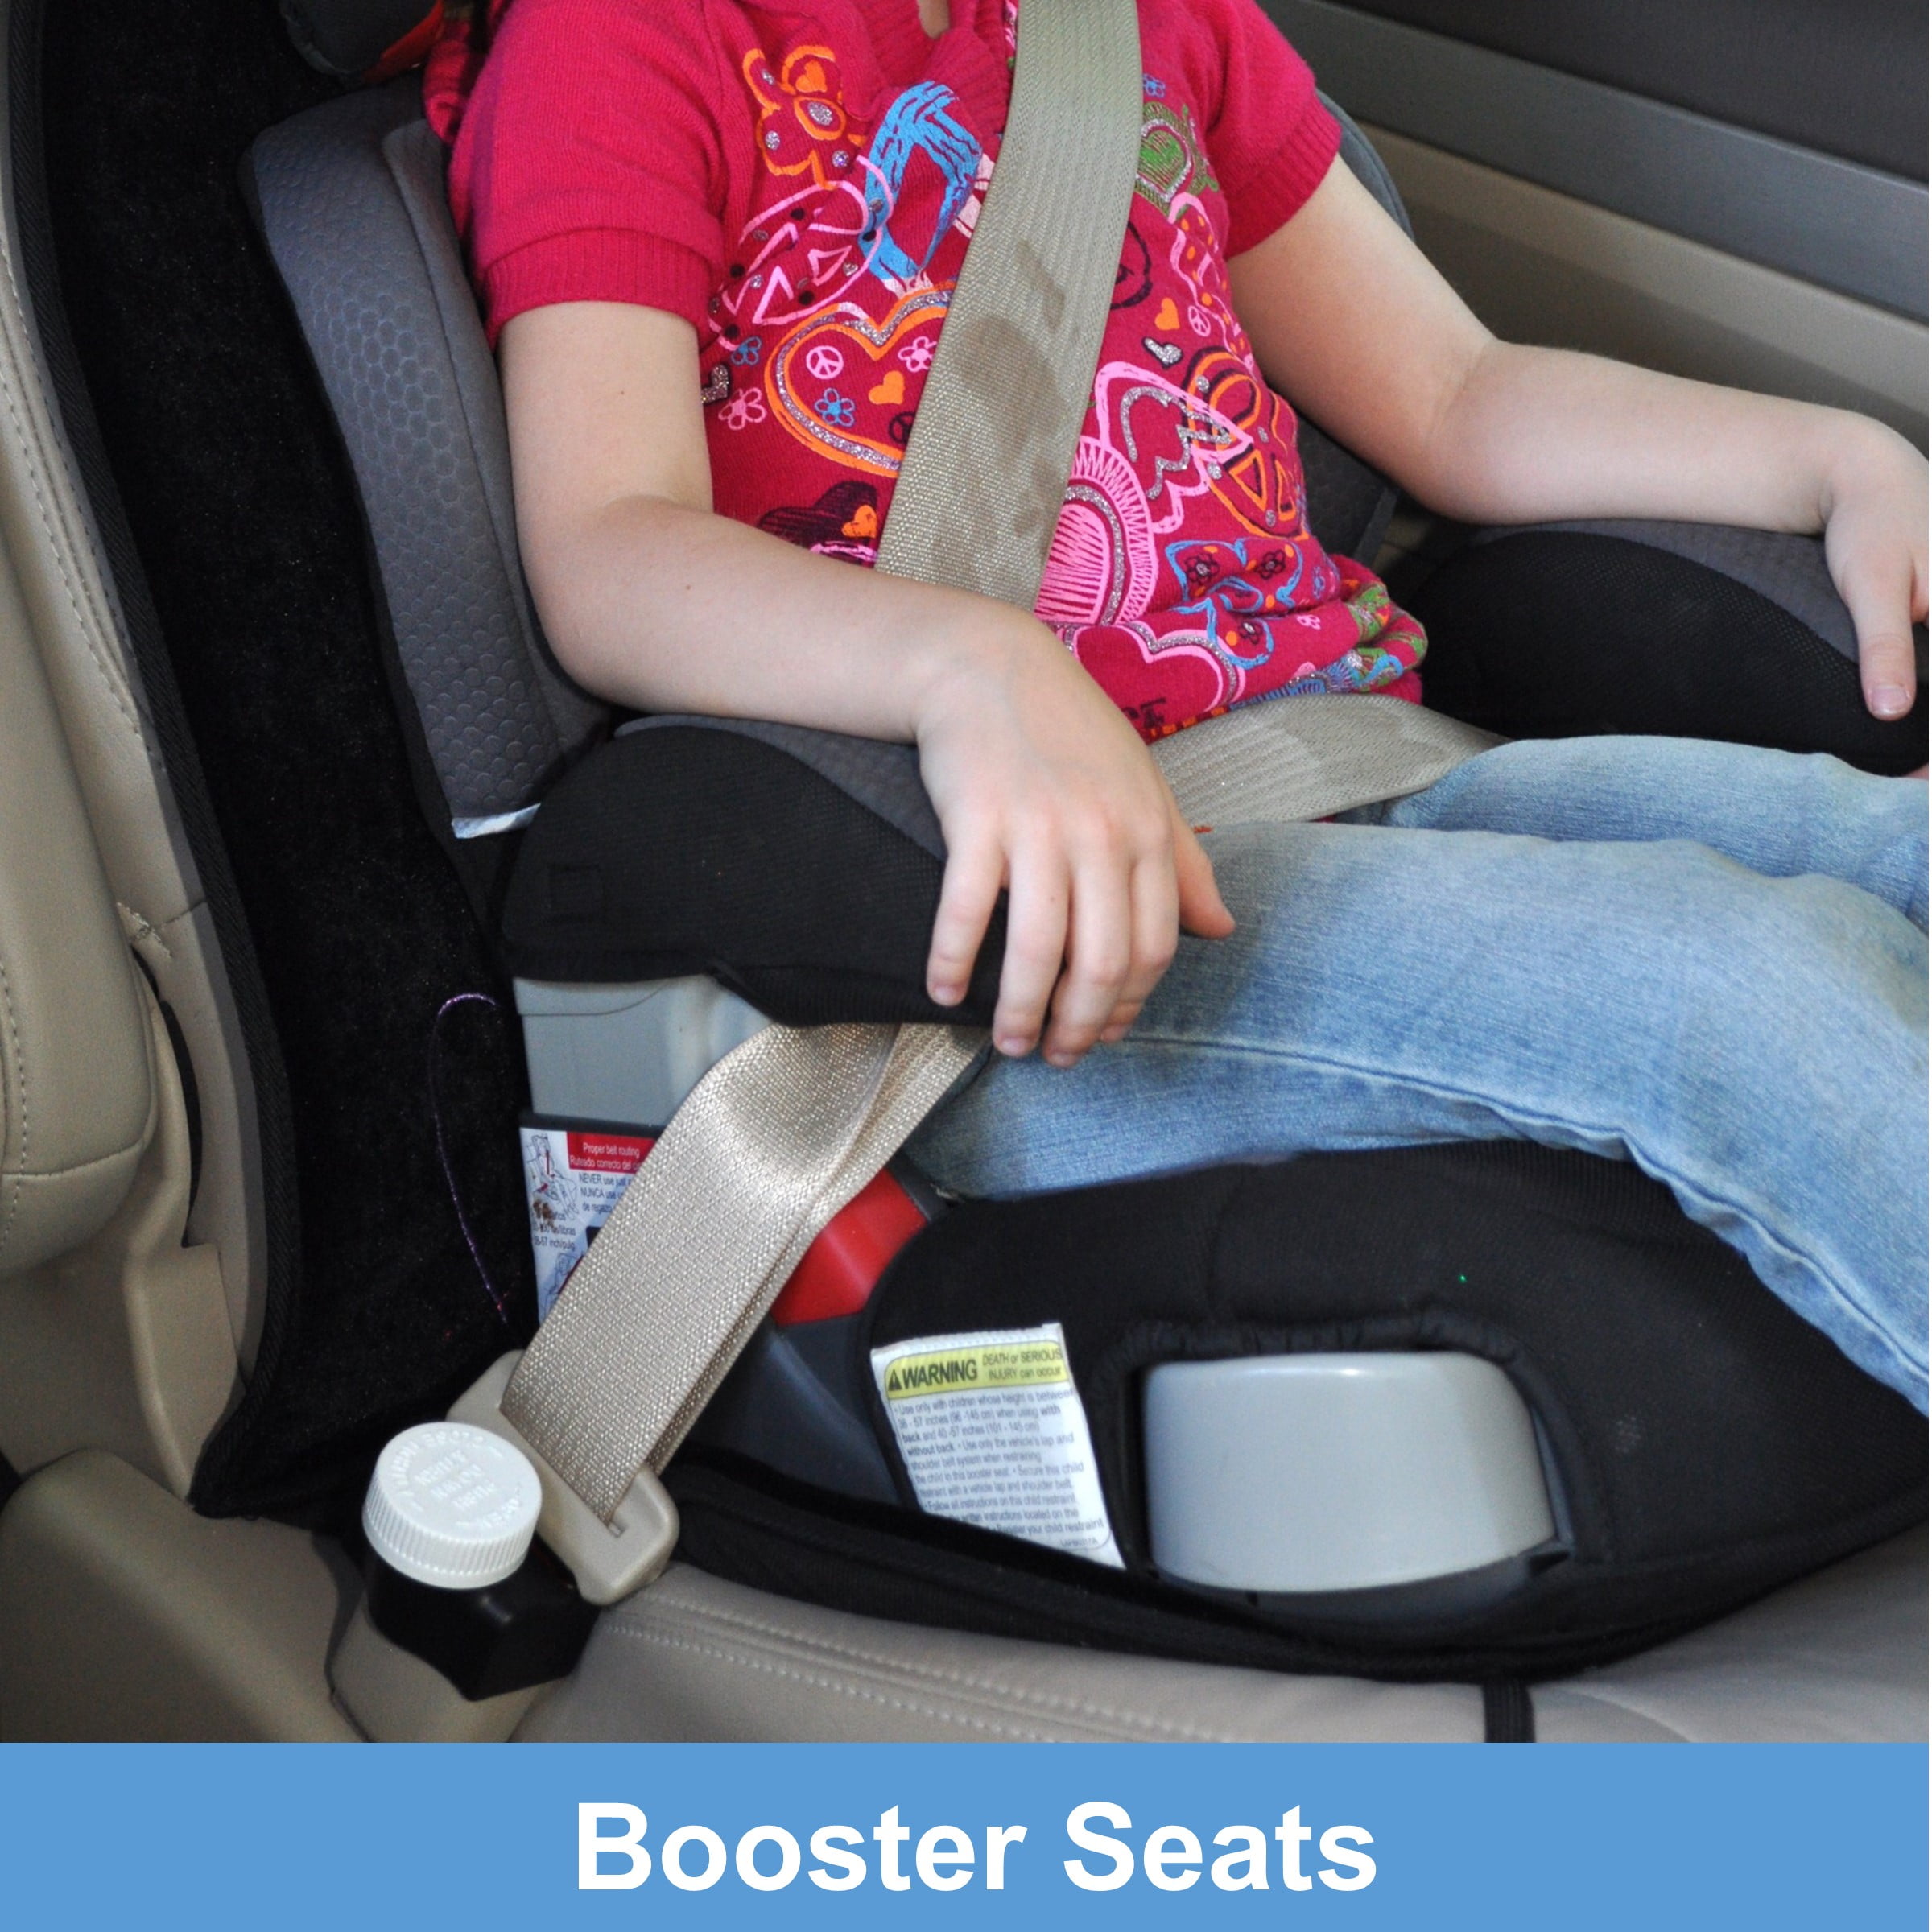 Buckle Guard PRO Seat Belt Buckle Cover helps keep passengers safely  buckled up,2-Pk 